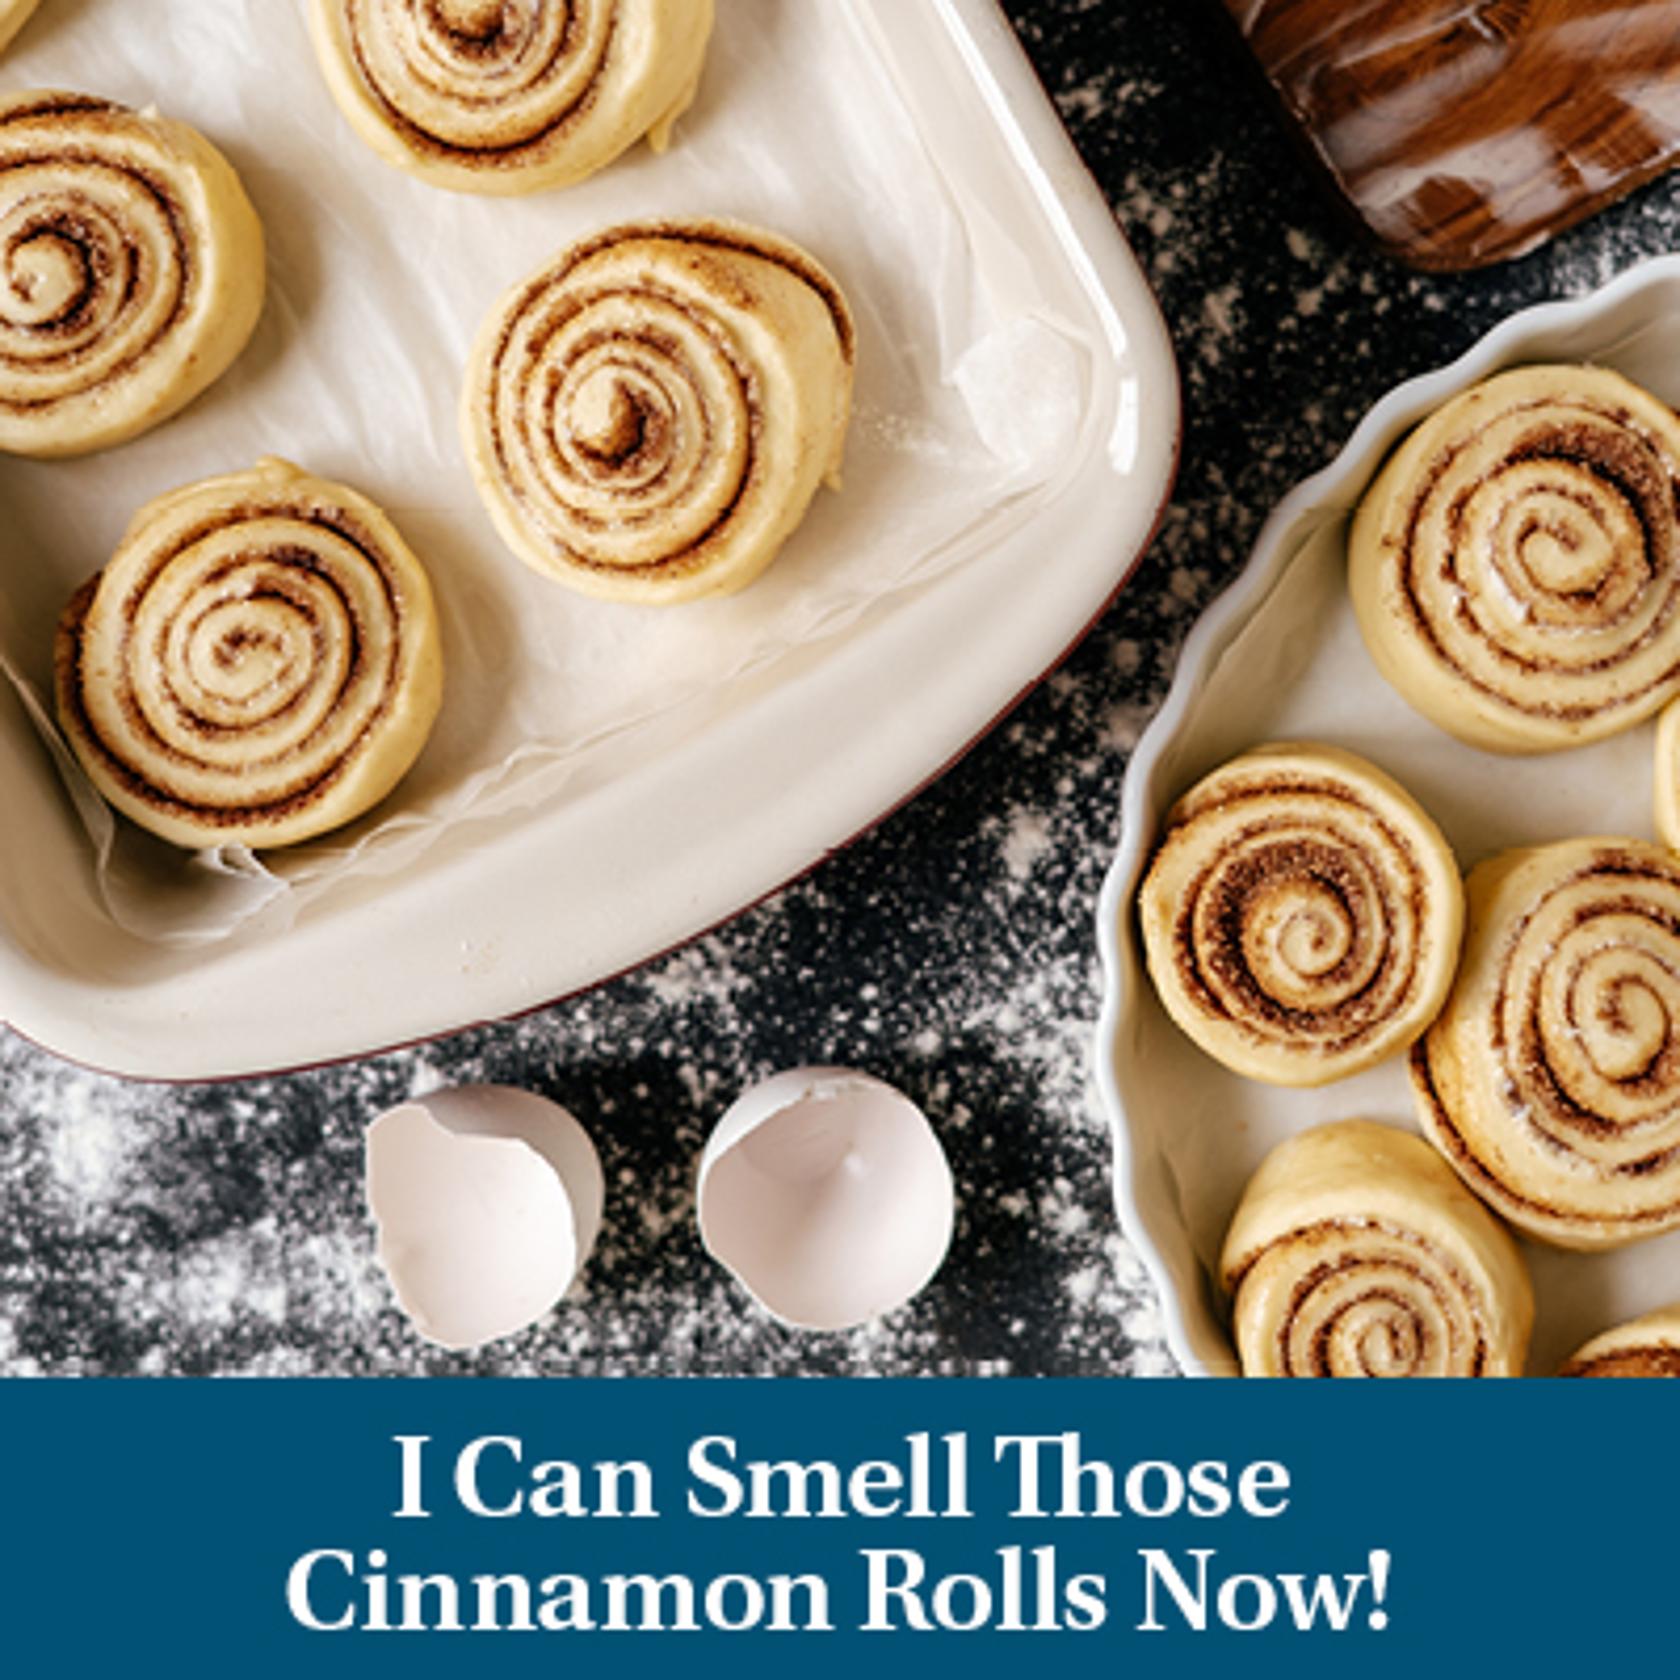 I Can Smell Those Cinnamin Rolls Now!